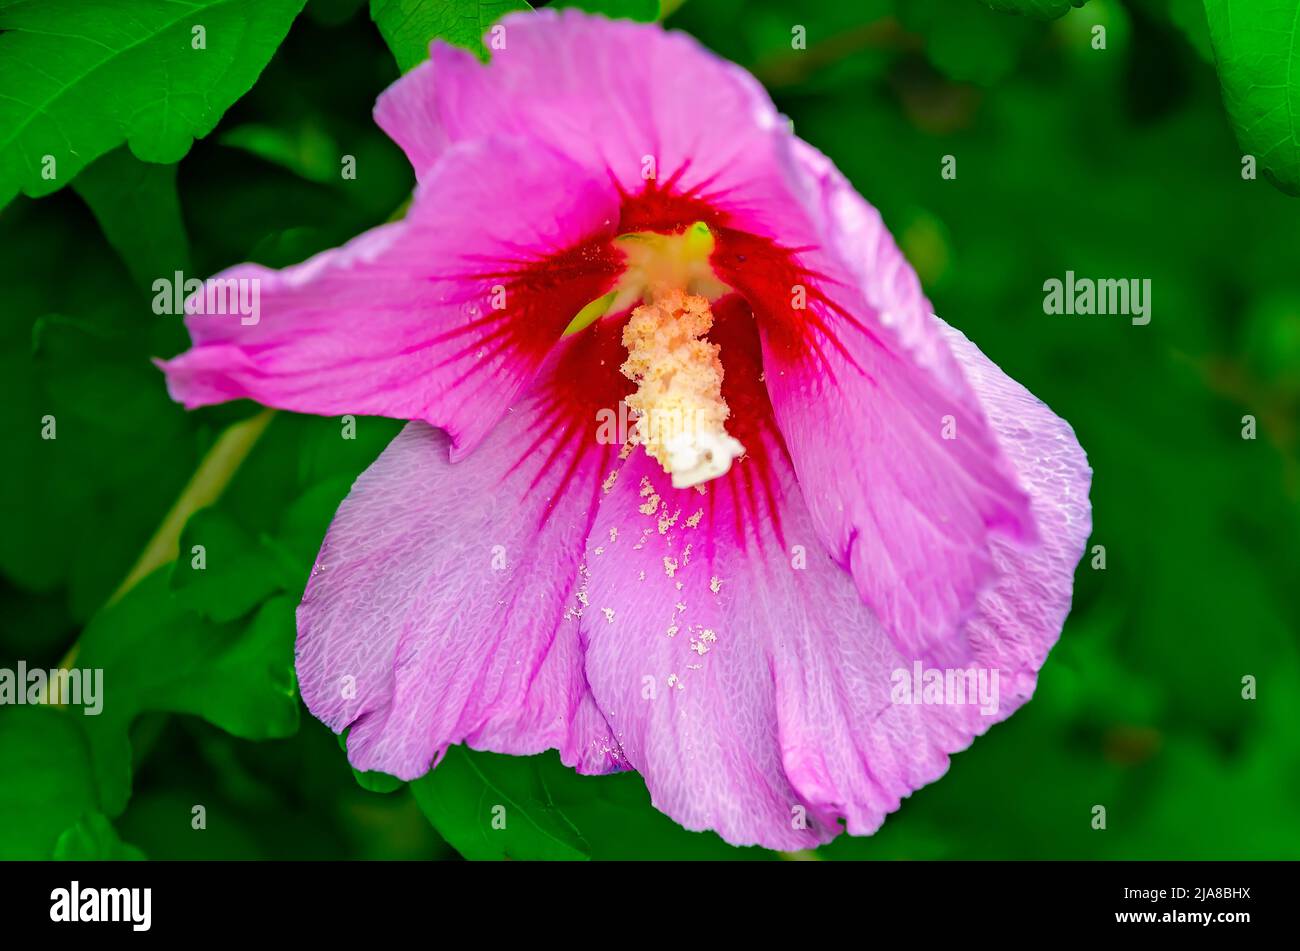 Rose of Sharon hibiscus (Hibiscus syriacus), also known as rose mallow, grows downtown, May 22, 2022, in Biloxi, Mississippi. Stock Photo